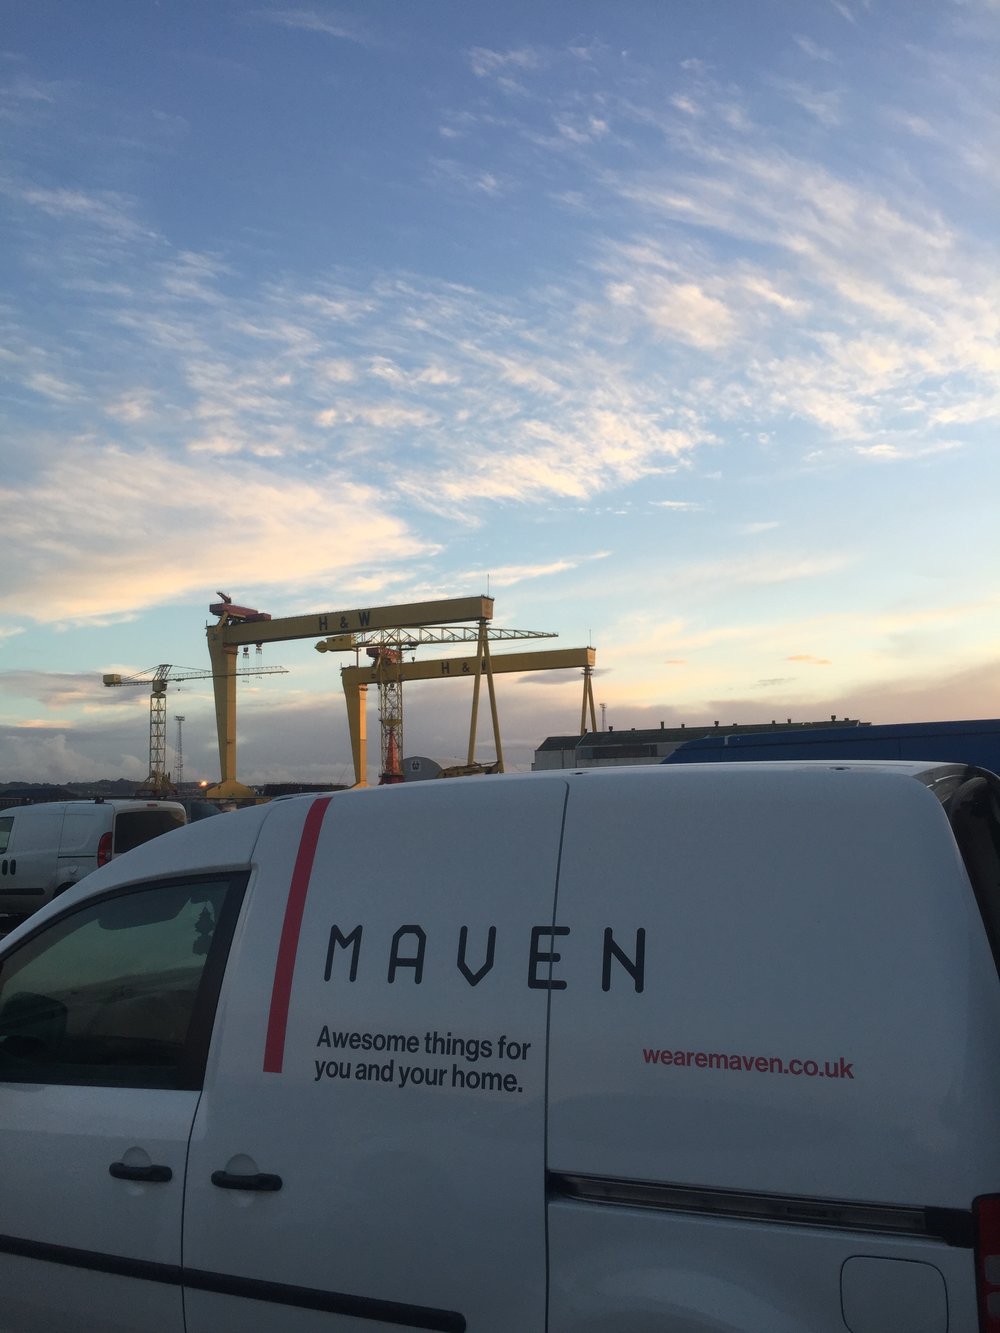 Wouldn't be without our trusty Maven van! 